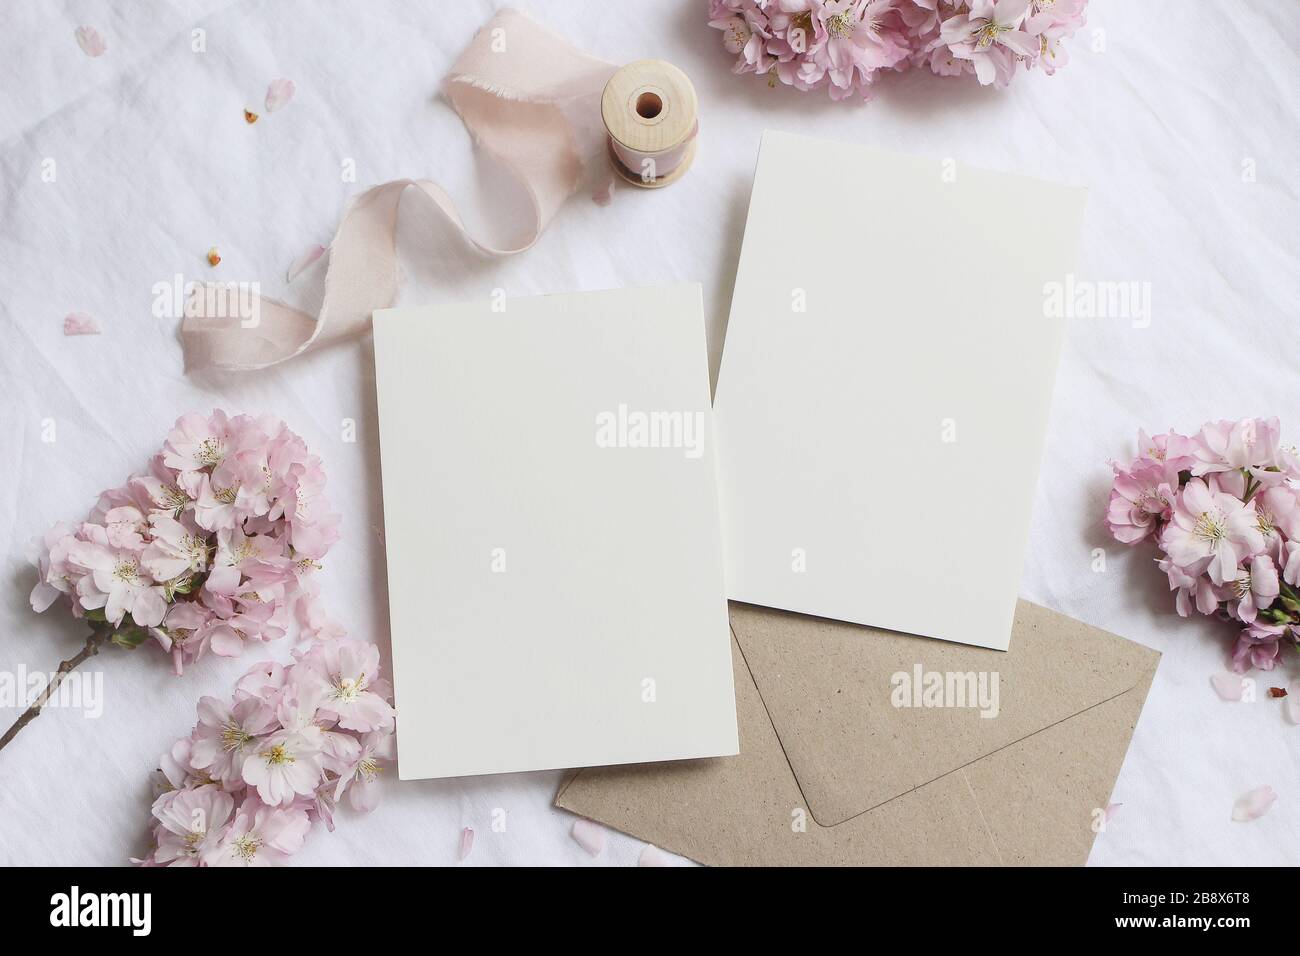 Wedding stationery mock-up scene. Blank greeting cards, envelope on linen tablecloth background with pink blossoming cherry tree branches and ribbon, Stock Photo